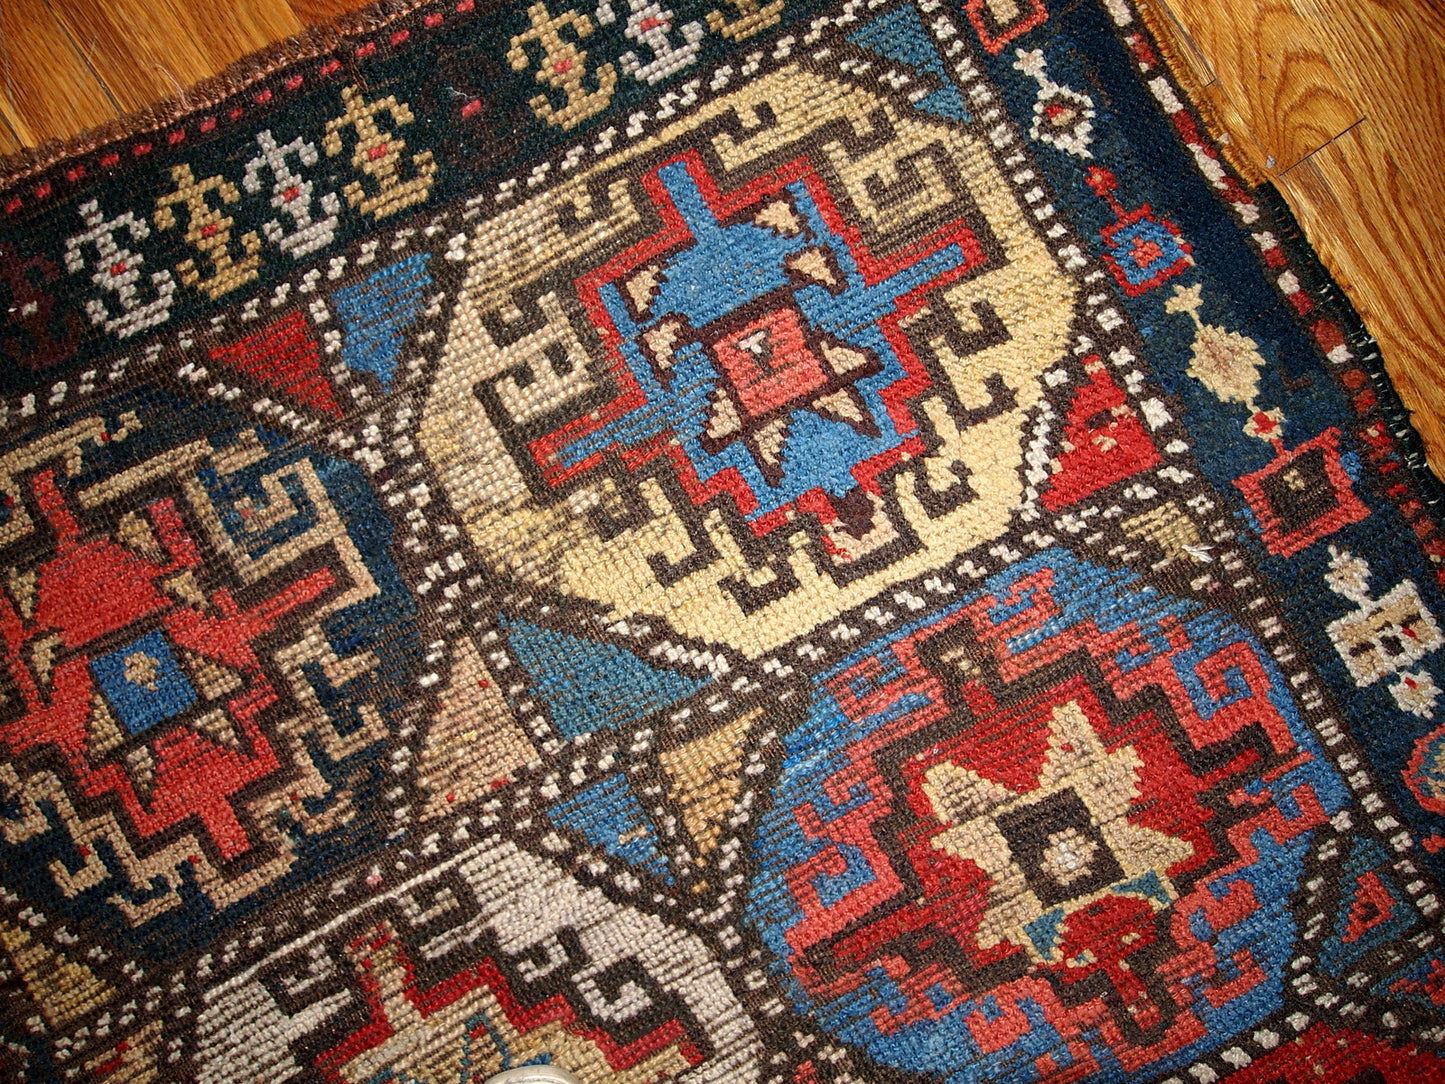 Antique collectible Kurdish rug in colorful shades and tribal ornaments. The rug is in a good shape for it's age, has some age wear. 